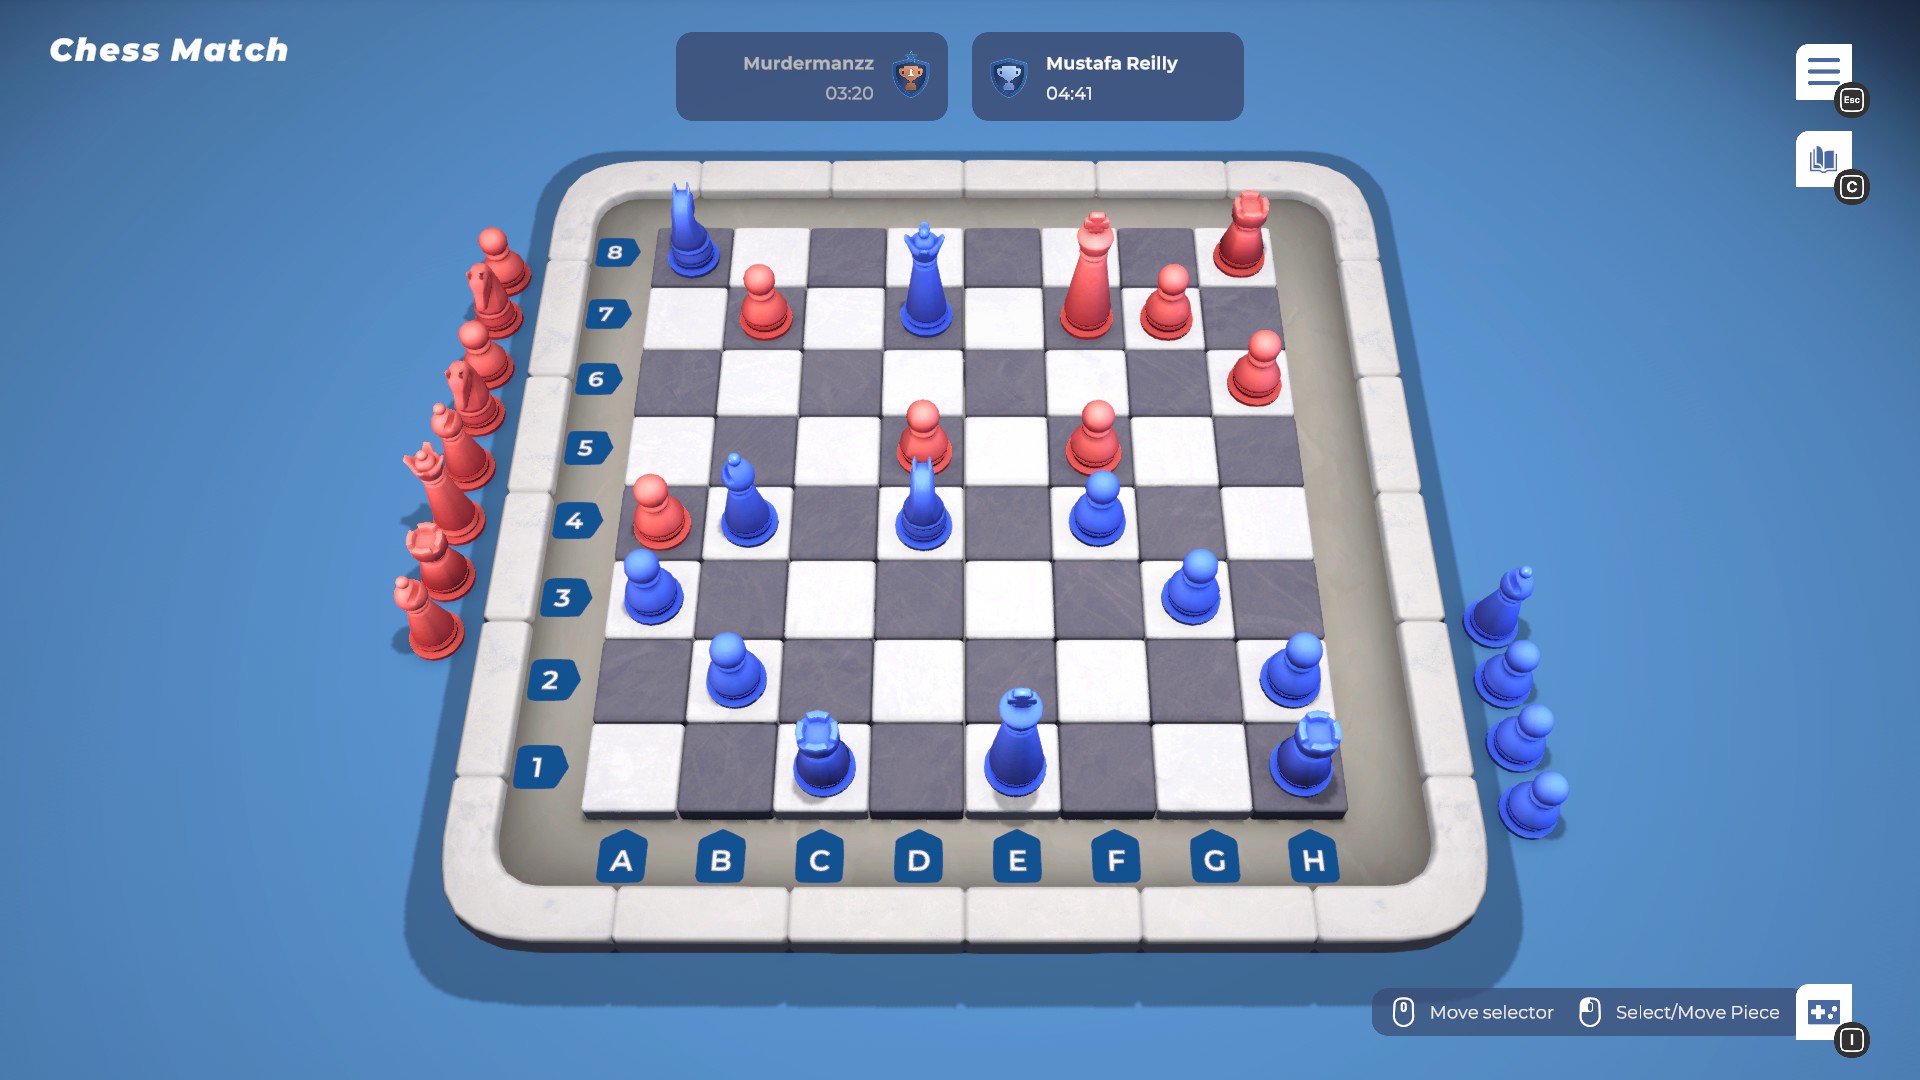 Chessarama Review (PC) - It's Rook To B Squared - Finger Guns